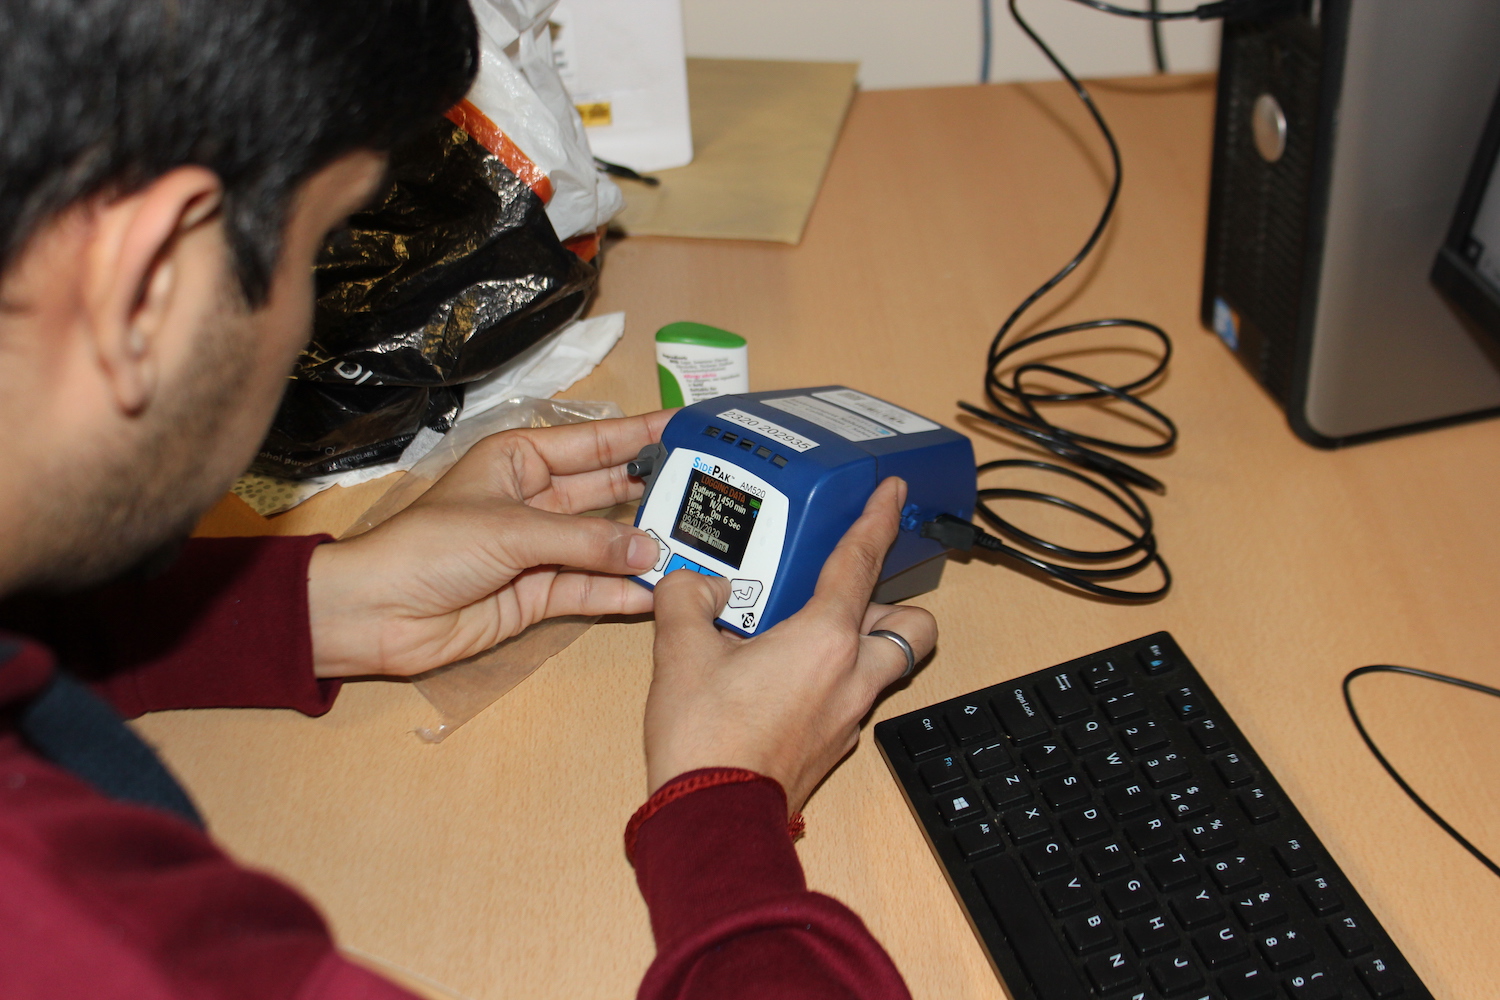 Researcher changing the settings of the Sidepak to configure for the calibration exercise